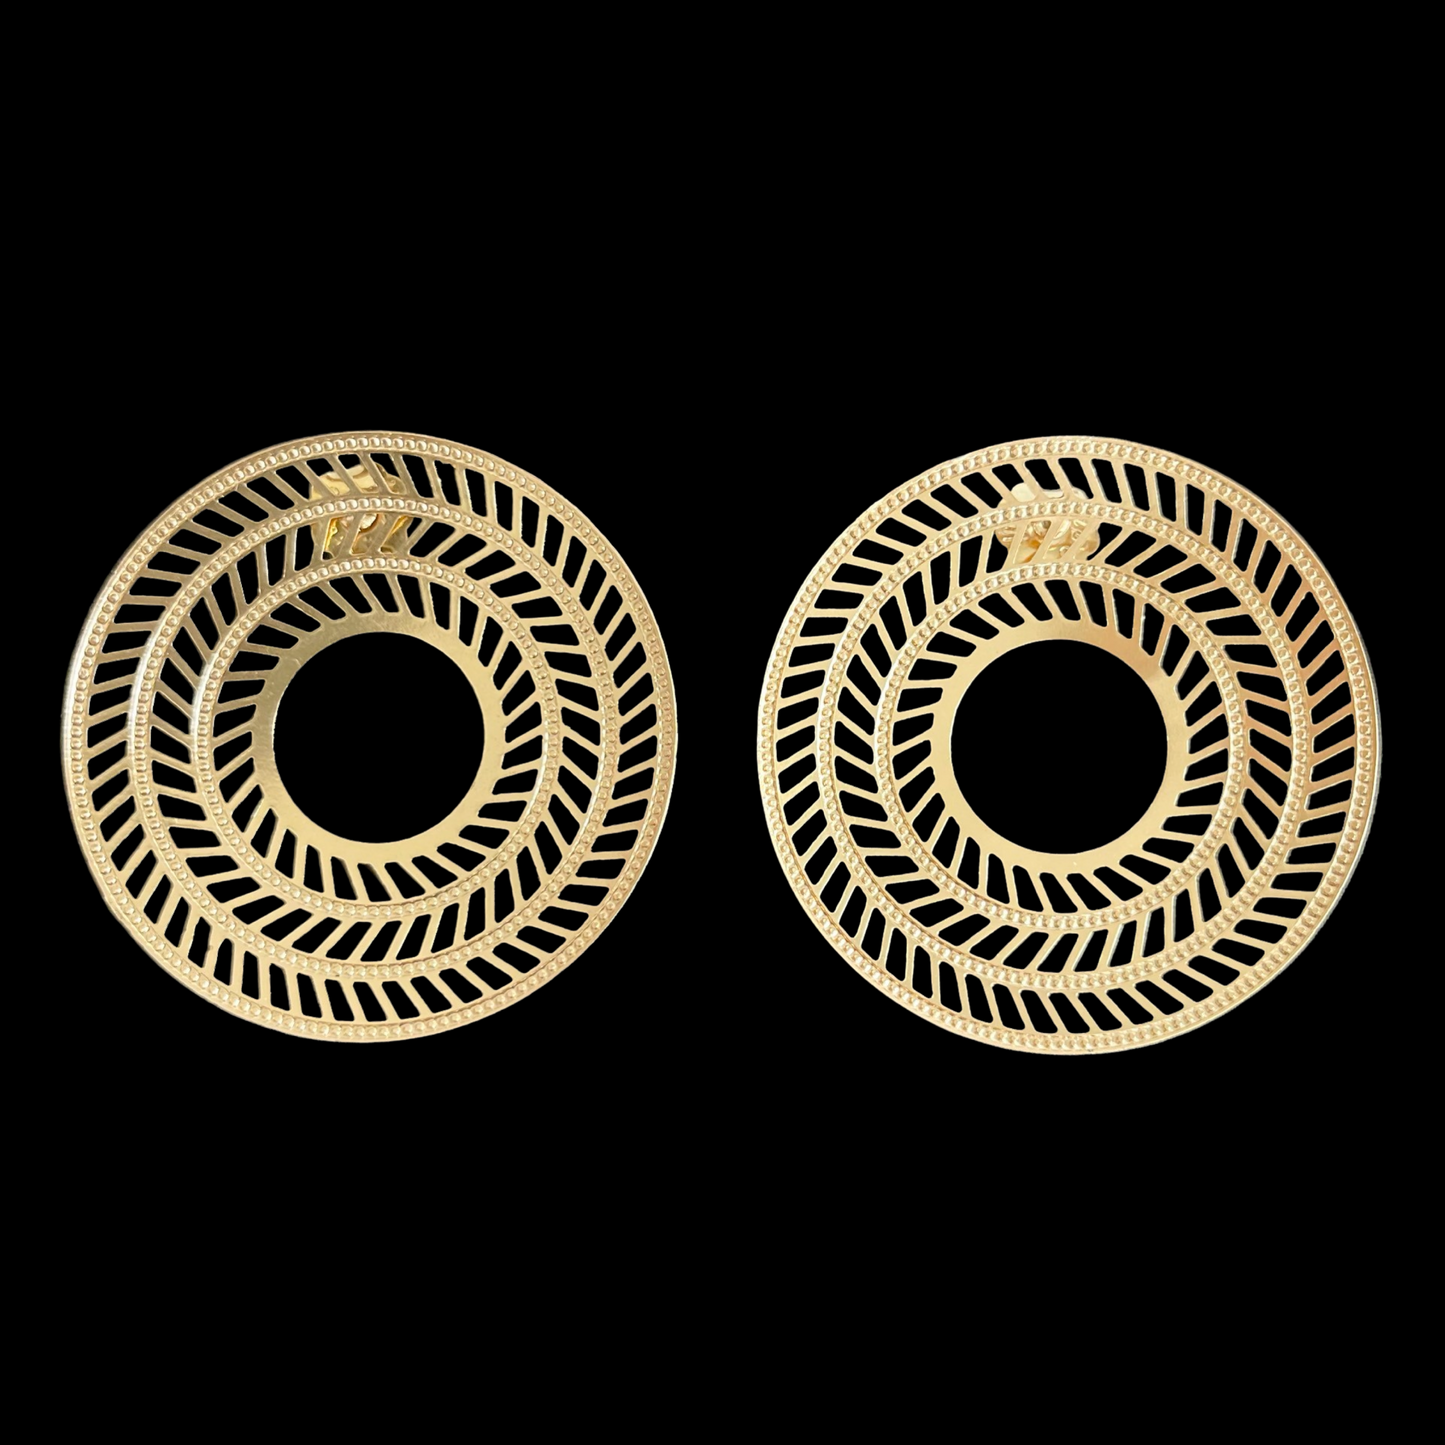 E. 24k gold plated filigree style round earrings